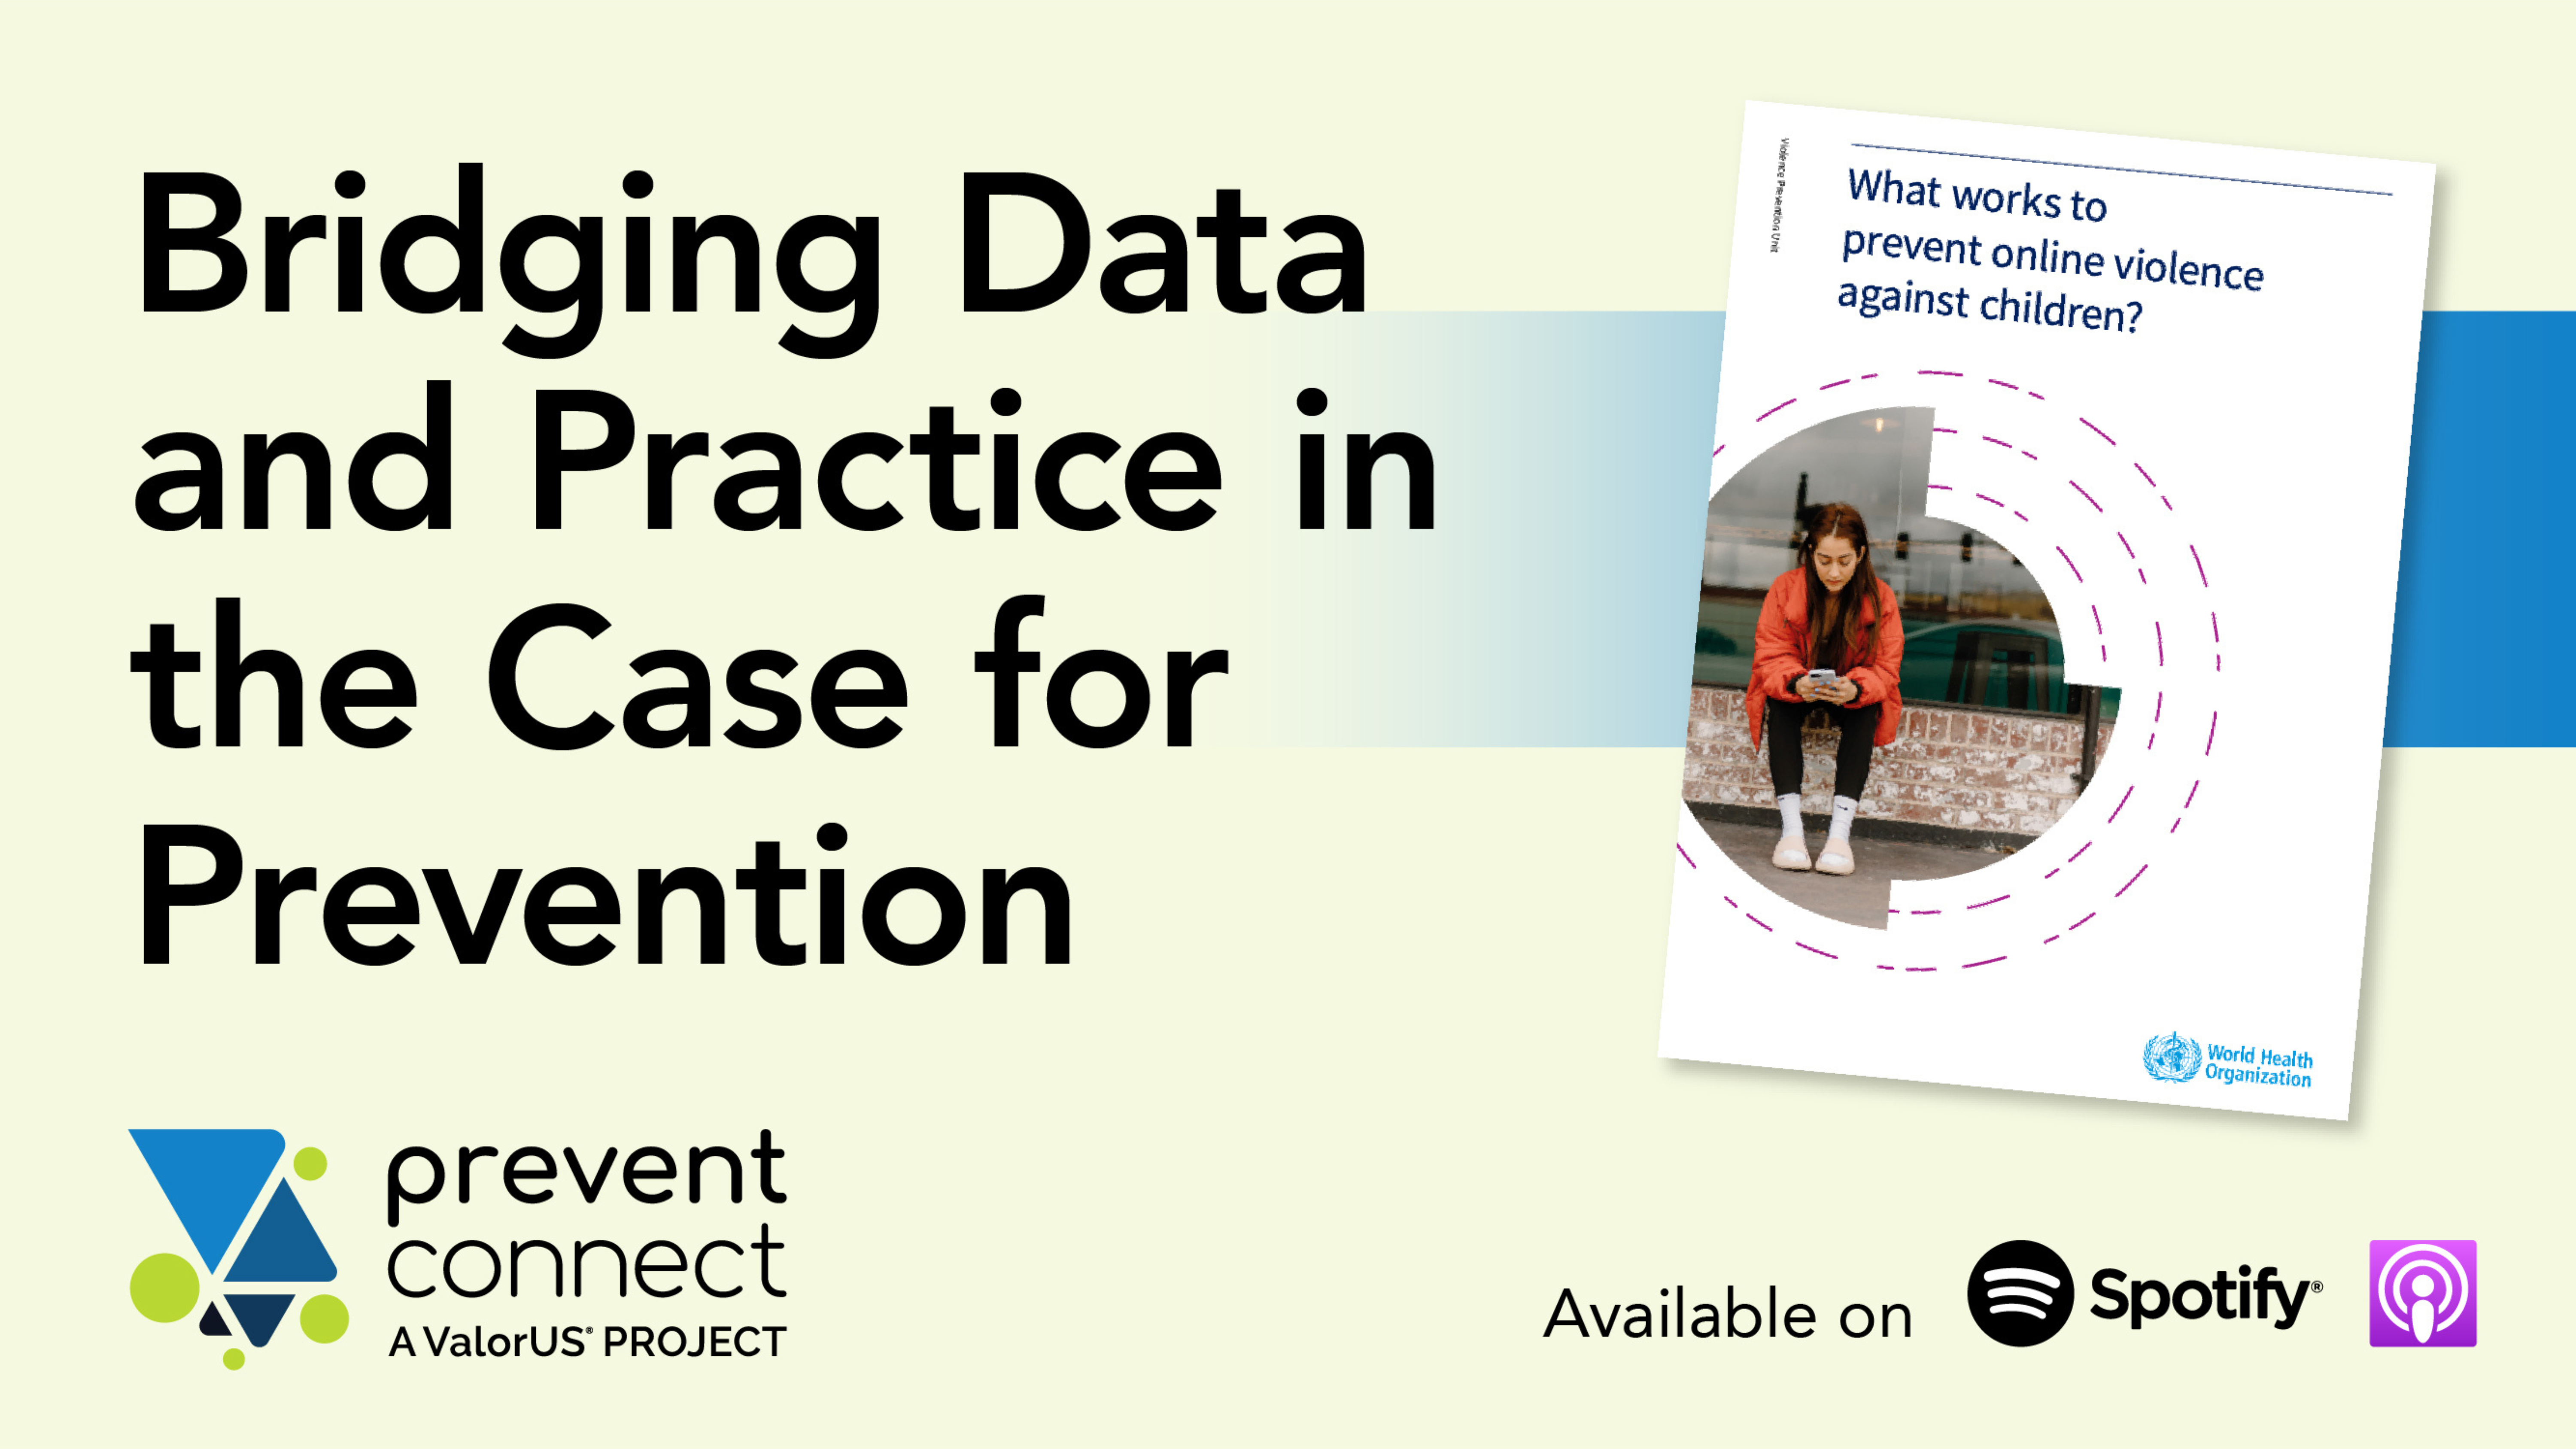 Bridging Data and Practice in the Case for Prevention